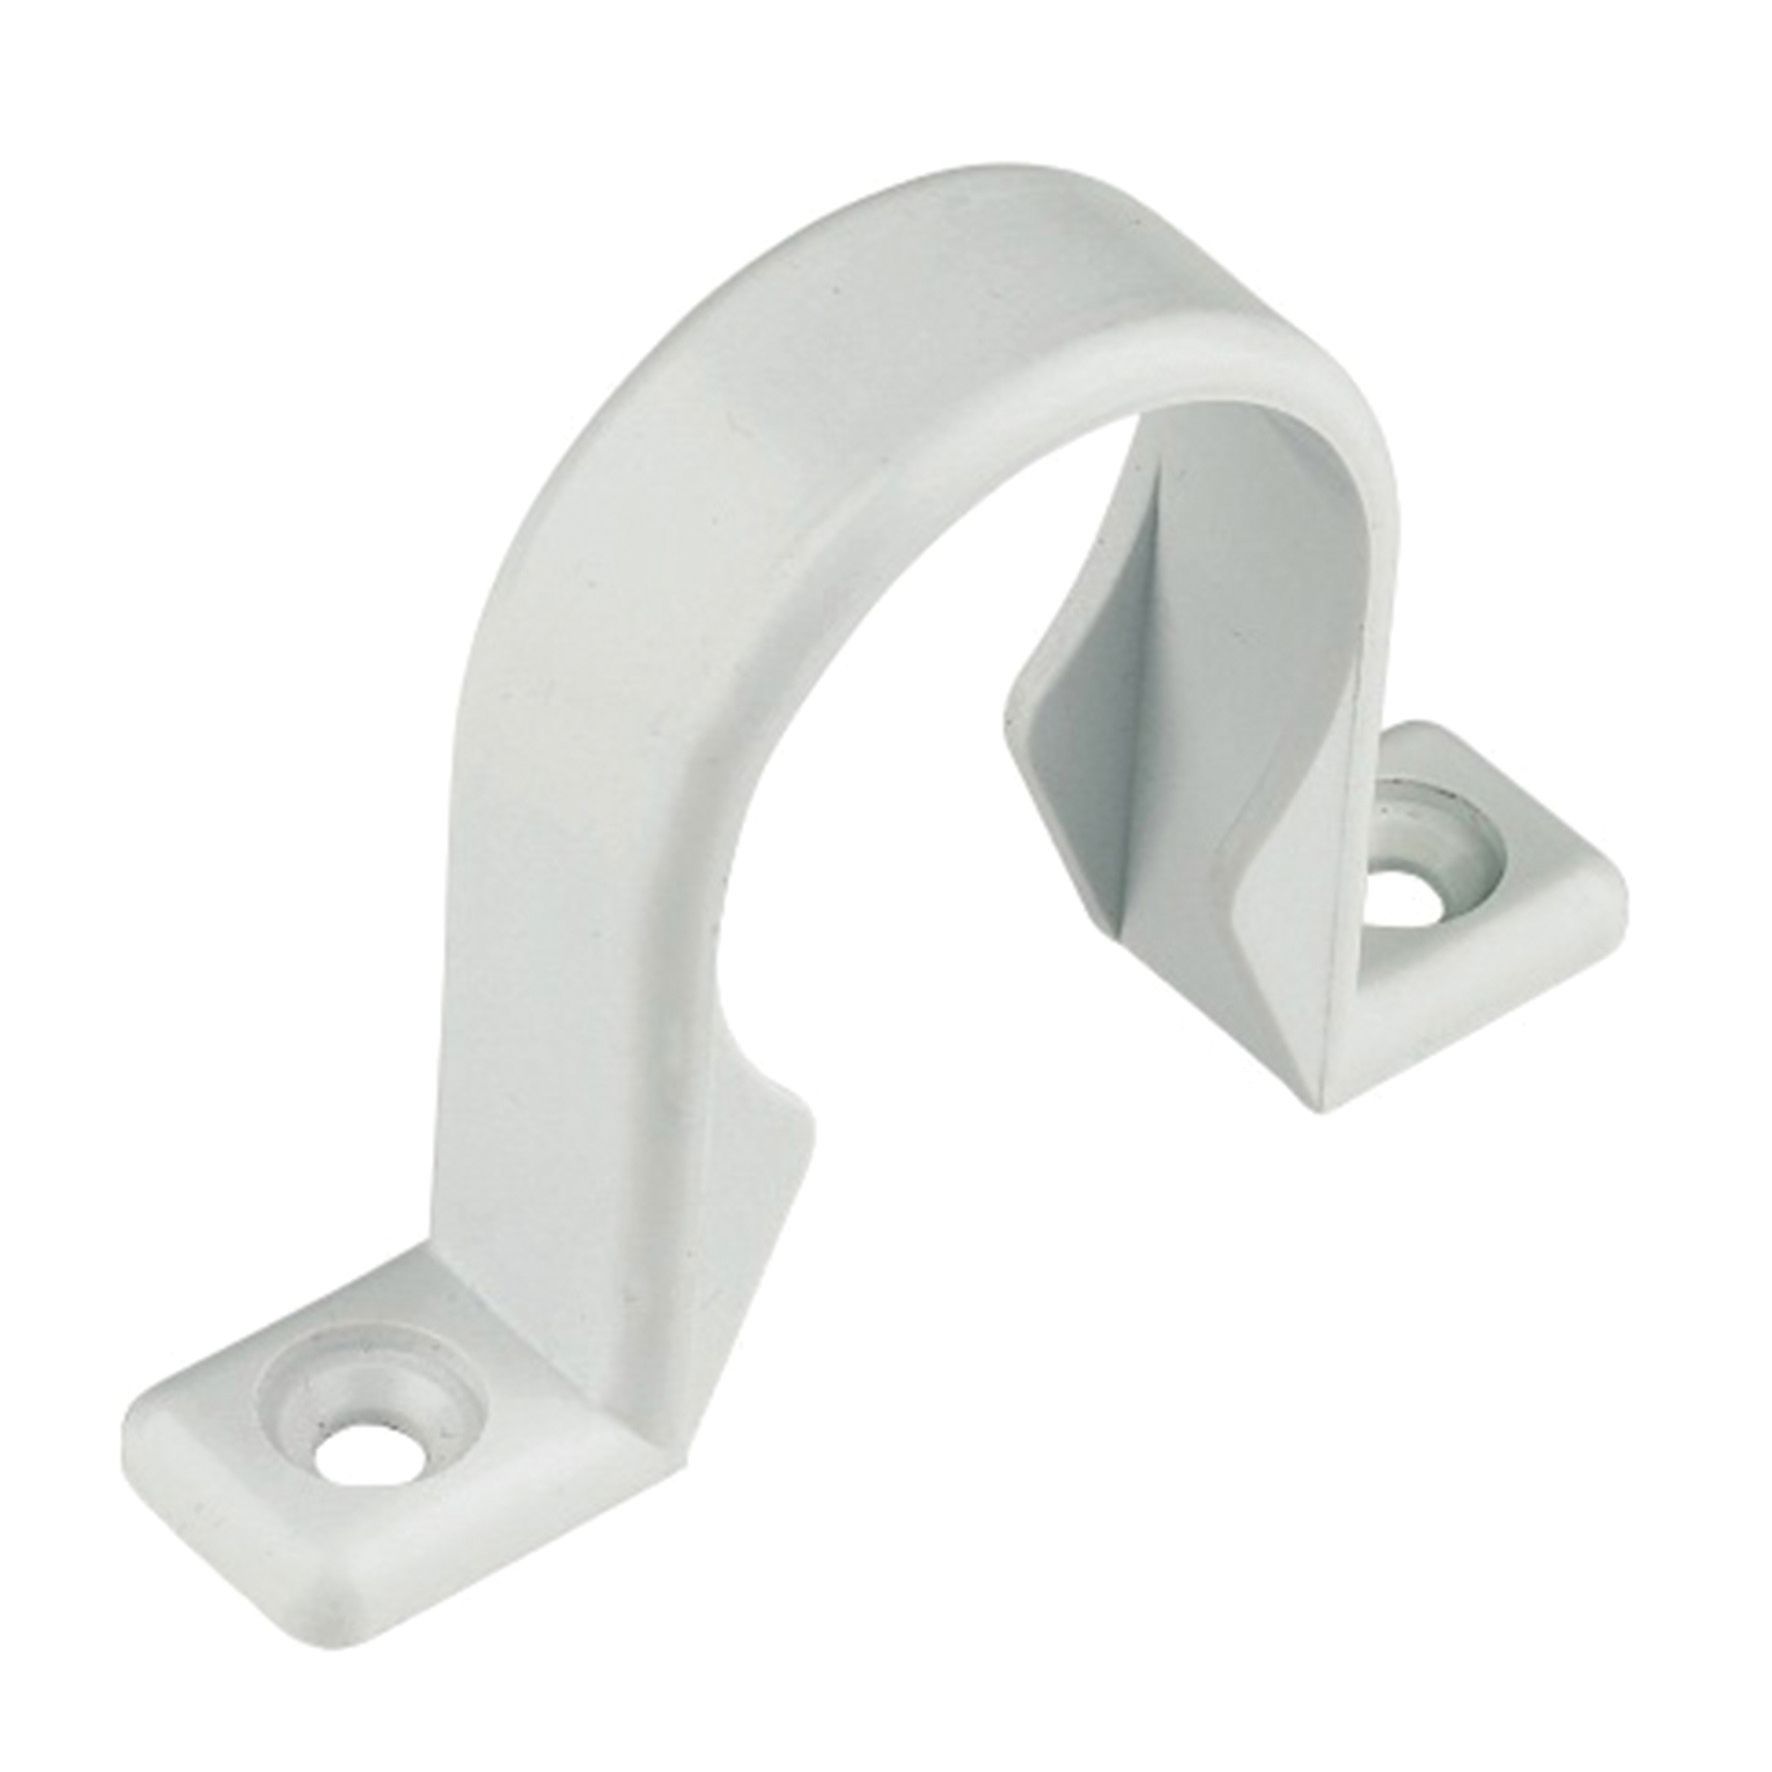 Image of FloPlast WP34W Push-fit Waste Pipe Clips - White 32mm Pack of 3